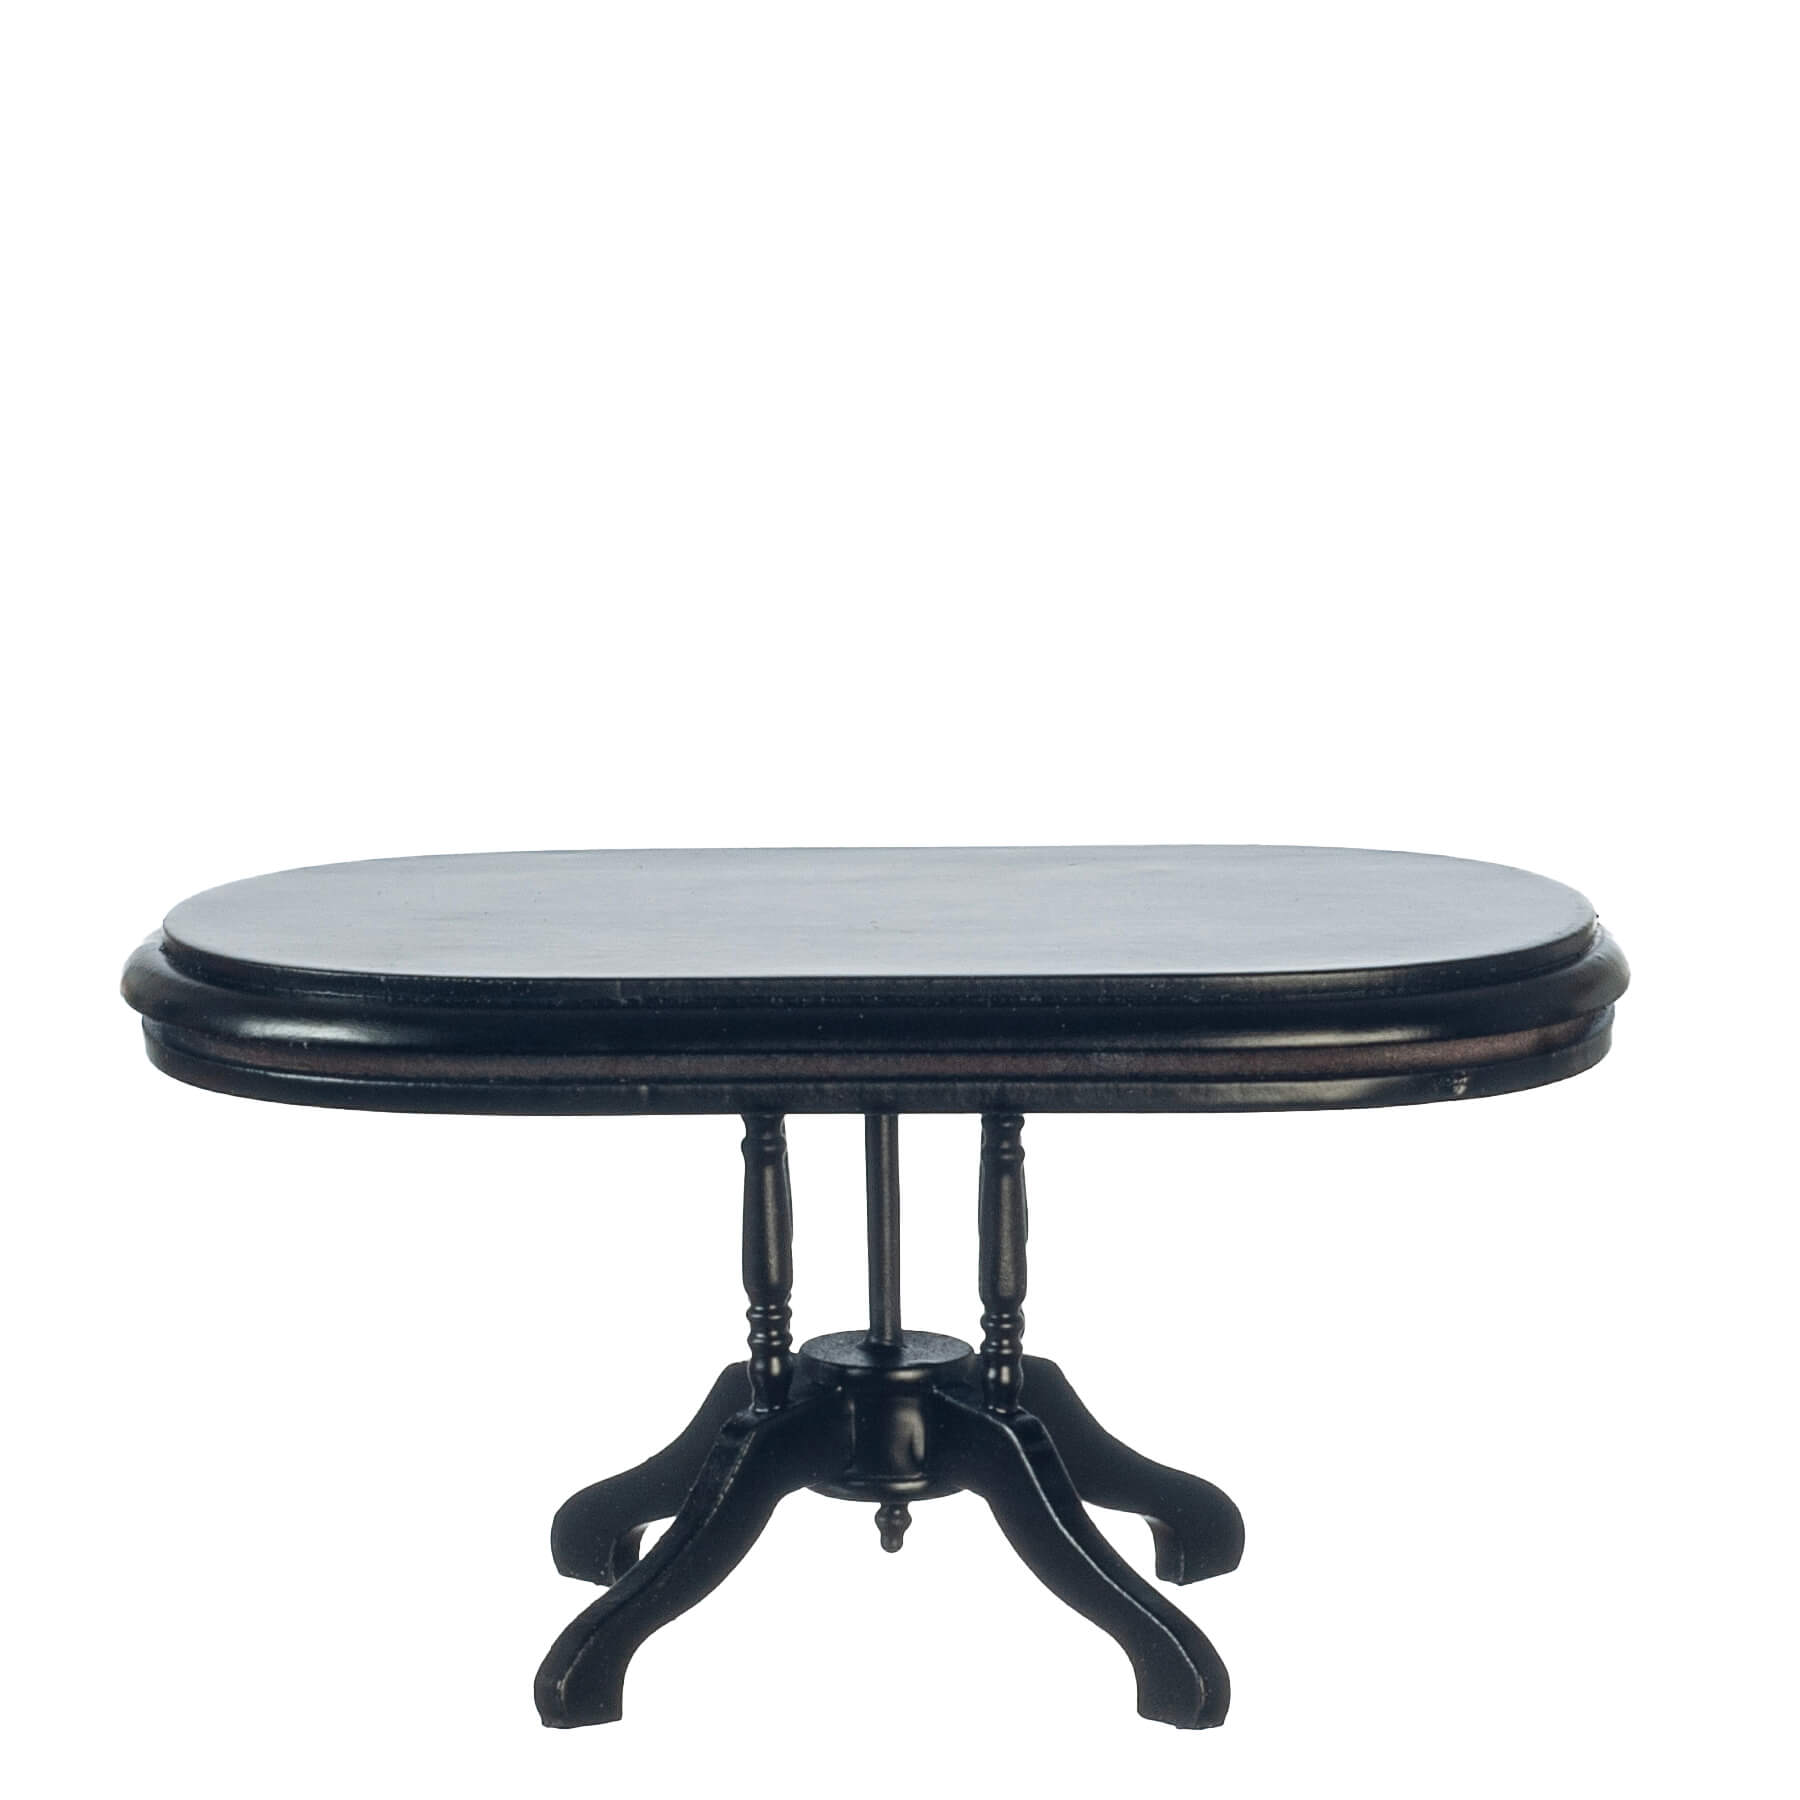 Oval Dining Room Table - Black